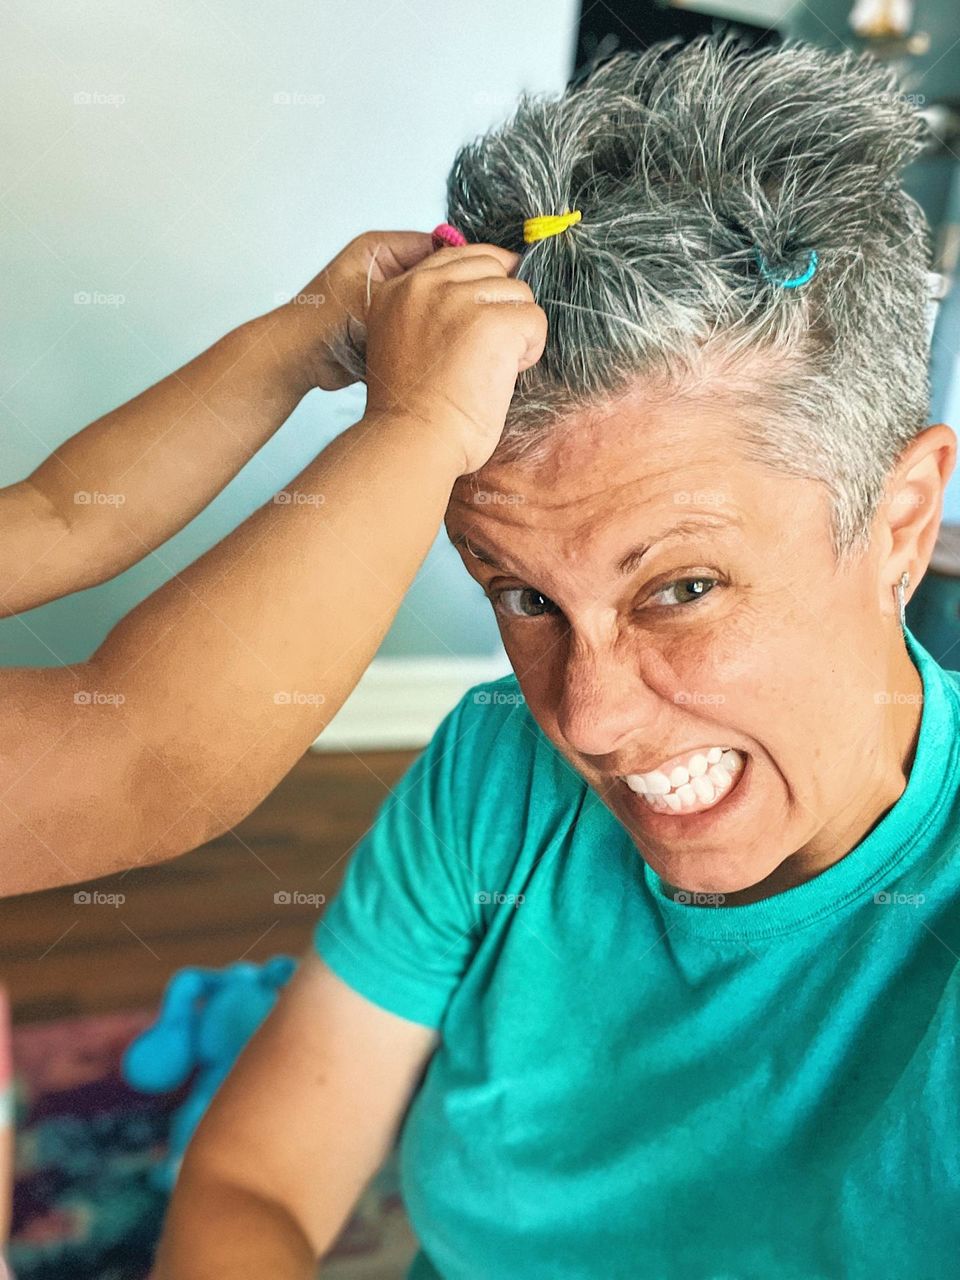 Woman getting hair done by a toddler, toddler puts mommy’s hair in ponytails, tiny pony tails on mommy’s head, woman grimacing from new hairdo, funny hair picture 